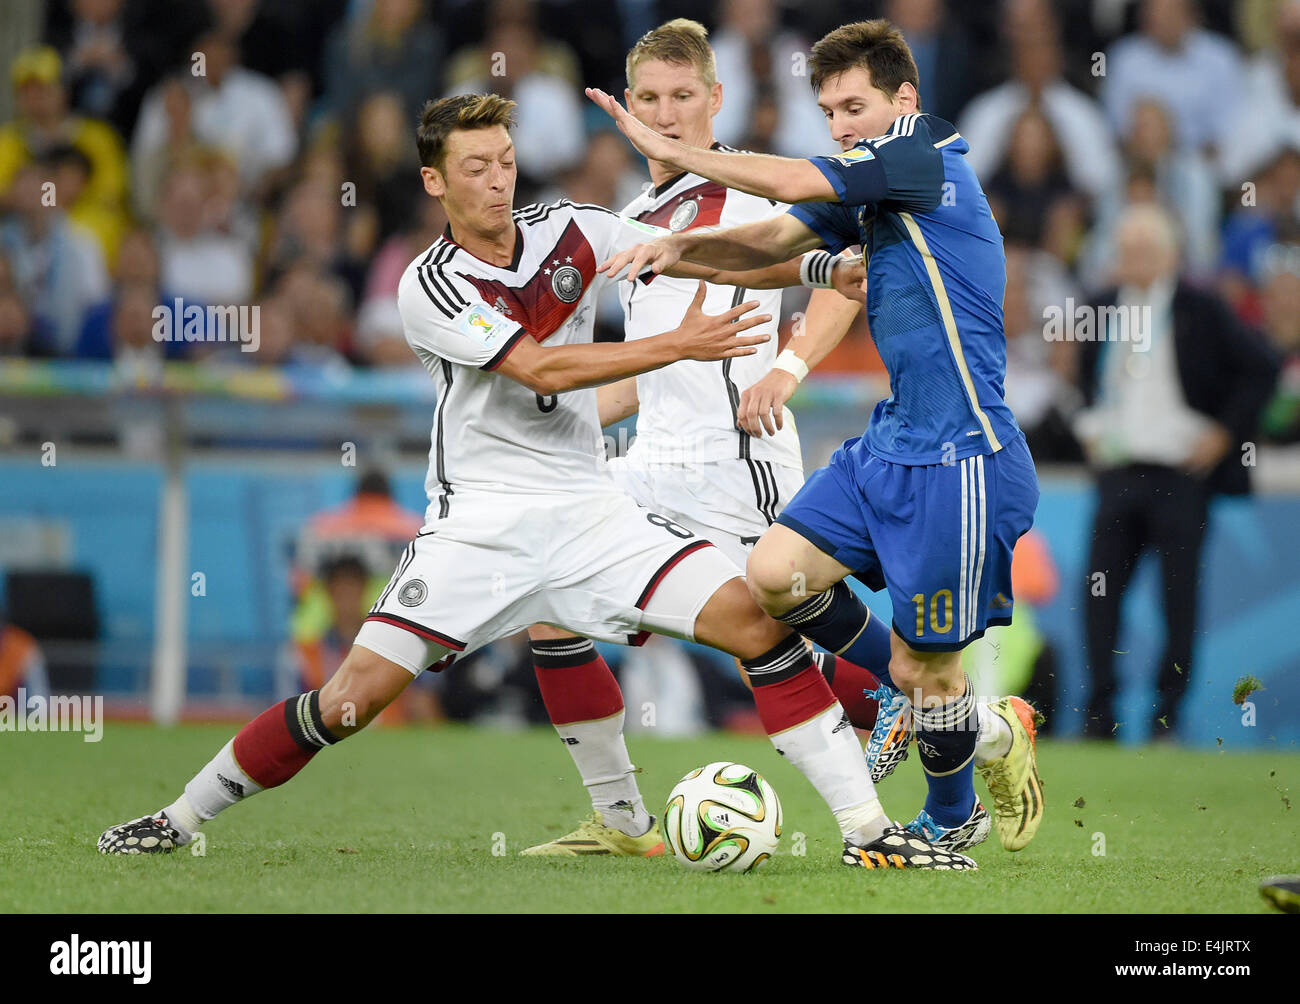 Rio de Janeiro, Brazil. 13th July, 2014. Mesut Oezil (L), Bastian Schweinsteiger (C) of Germany and Lionel Messi (R) of Argentina vie for the ball during the FIFA World Cup 2014 final soccer match between Germany and Argentina at the Estadio do Maracana in Rio de Janeiro, Brazil, 13 July 2014. Photo: Marcus Brandt/dpa/Alamy Live News Stock Photo